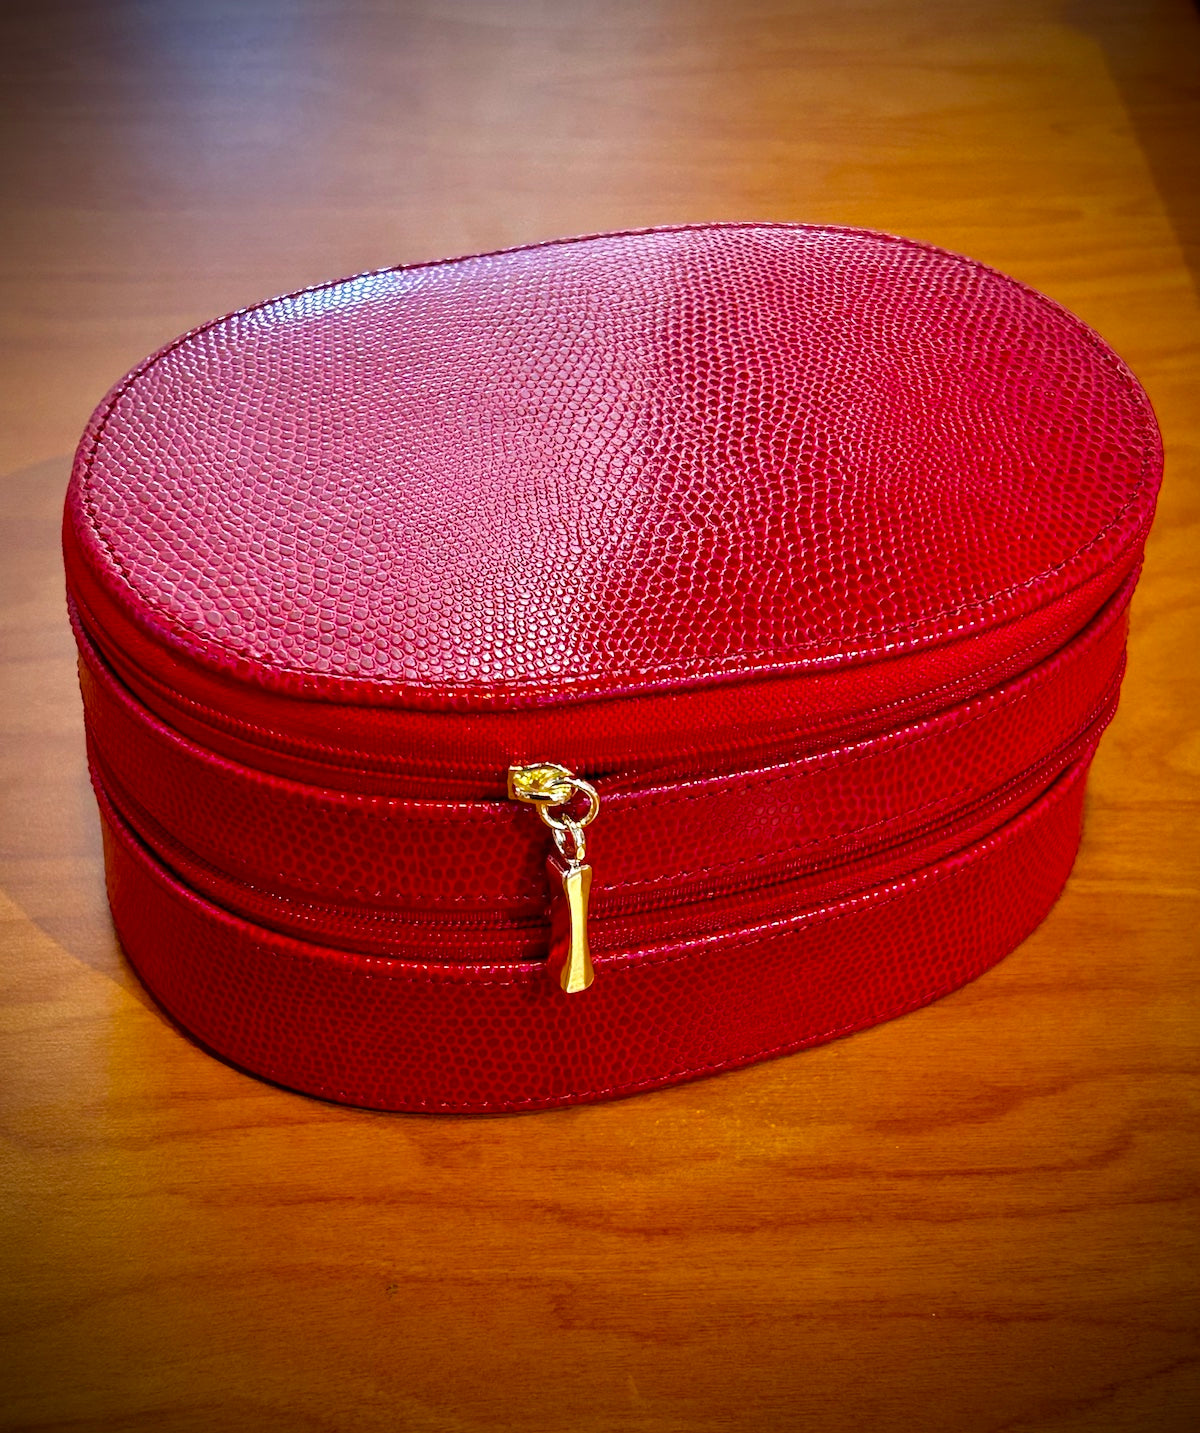 Red "Lizard" Leather Jewelry Case